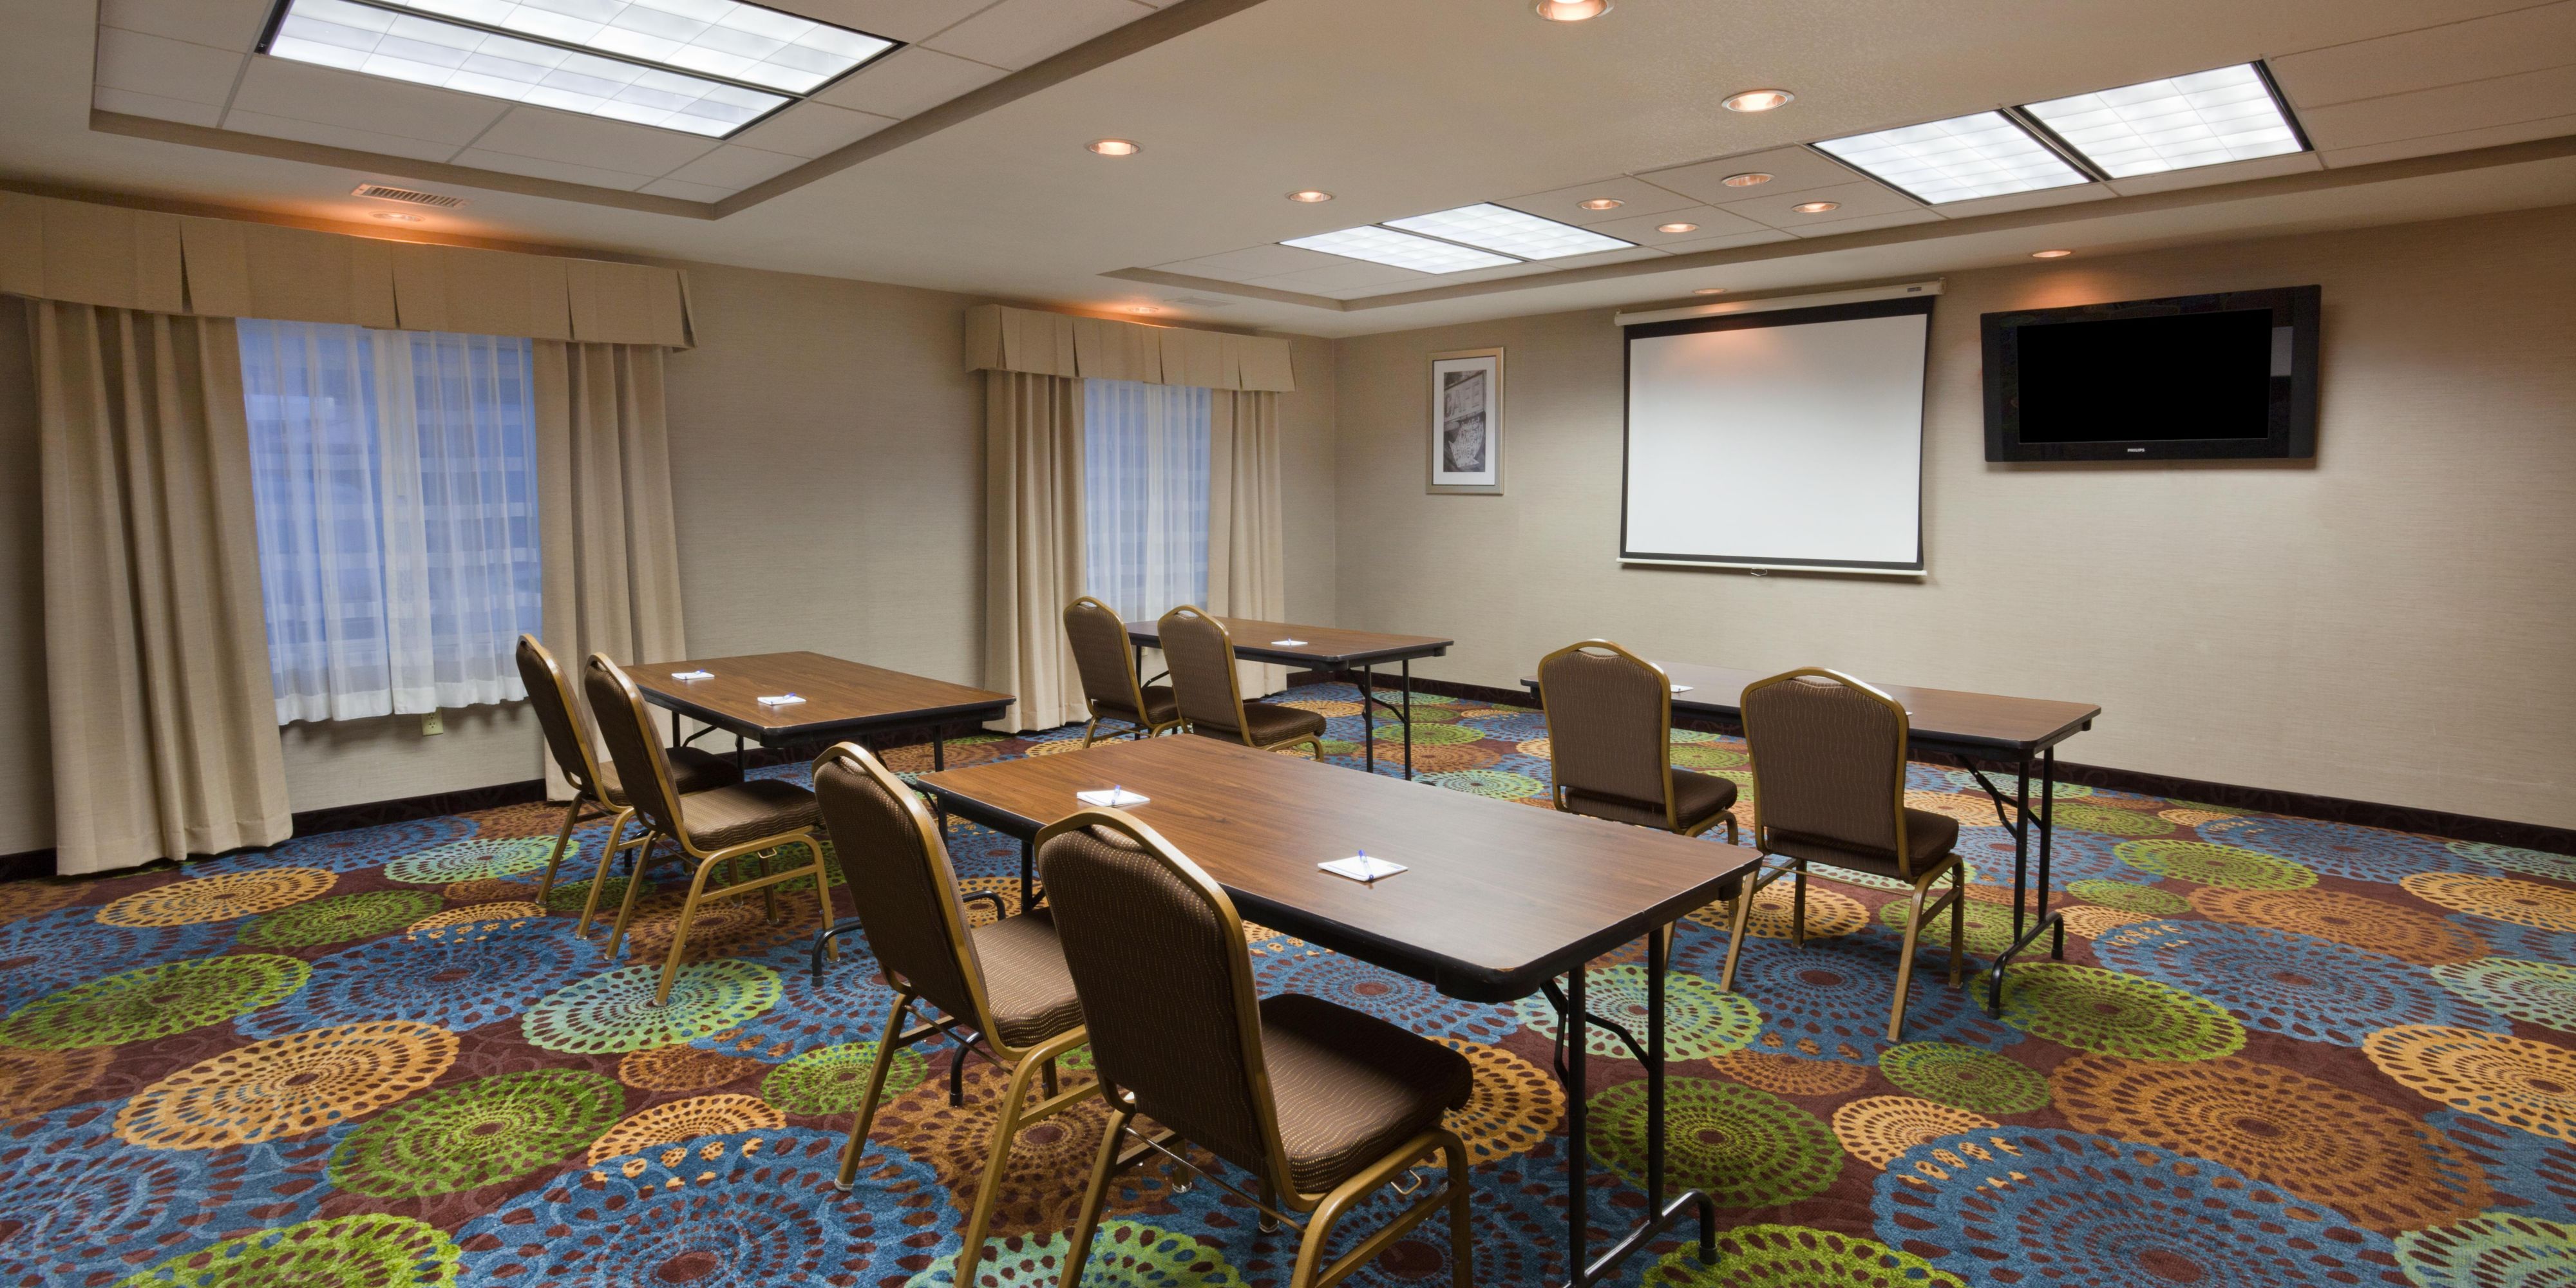 Plan your next event and meeting with us. Our event space provides 720 sq ft of flexible space. Displayed, is a classroom set-up. However, our hotel staff will provide a space to suit your needs, from banquets to presentations, we will accommodate. Our meeting room can even be used to prepare for an event at the attached Dakota Event Center.   